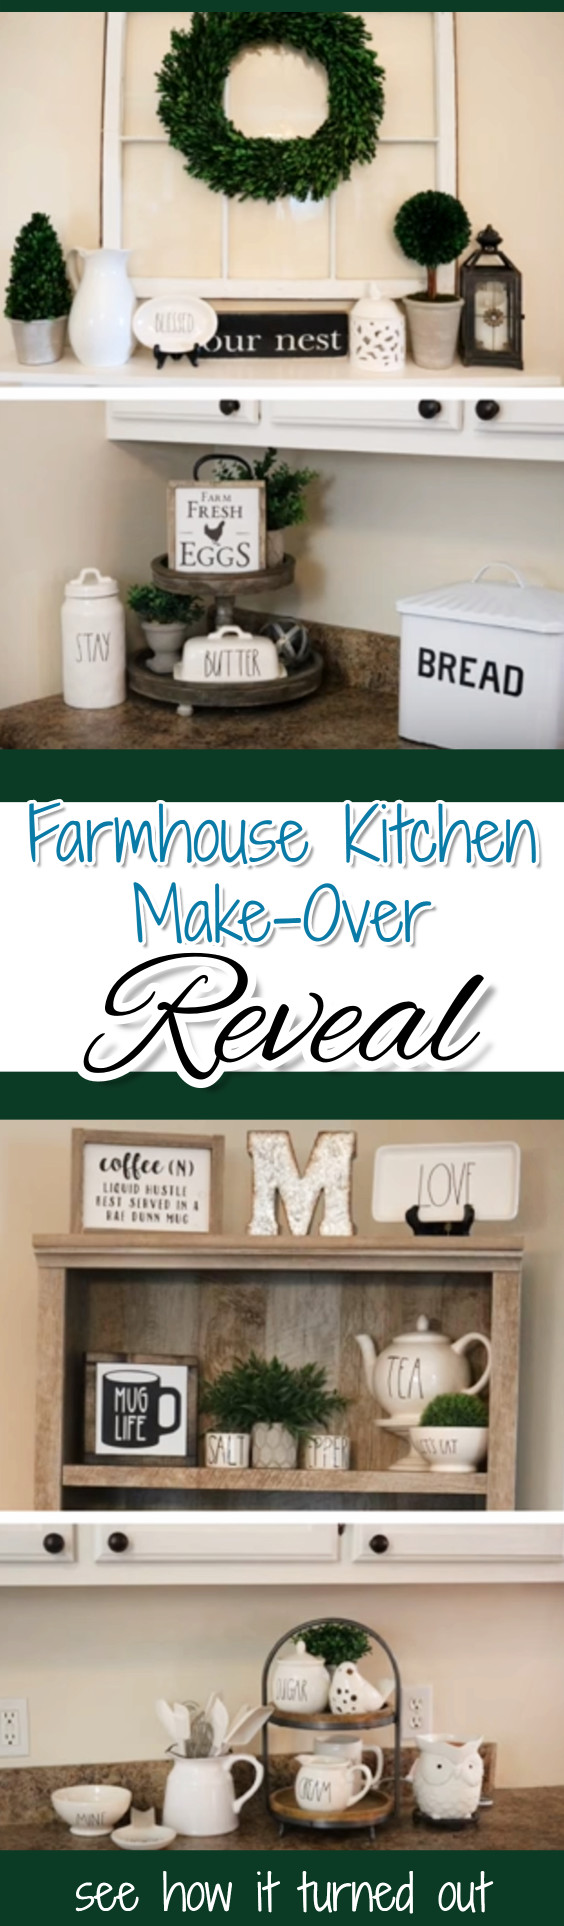 She redecorated her kitchen in Modern Farmhouse Style - see how it turned out!  Love all the country charm and rustic decor - gorgeous!